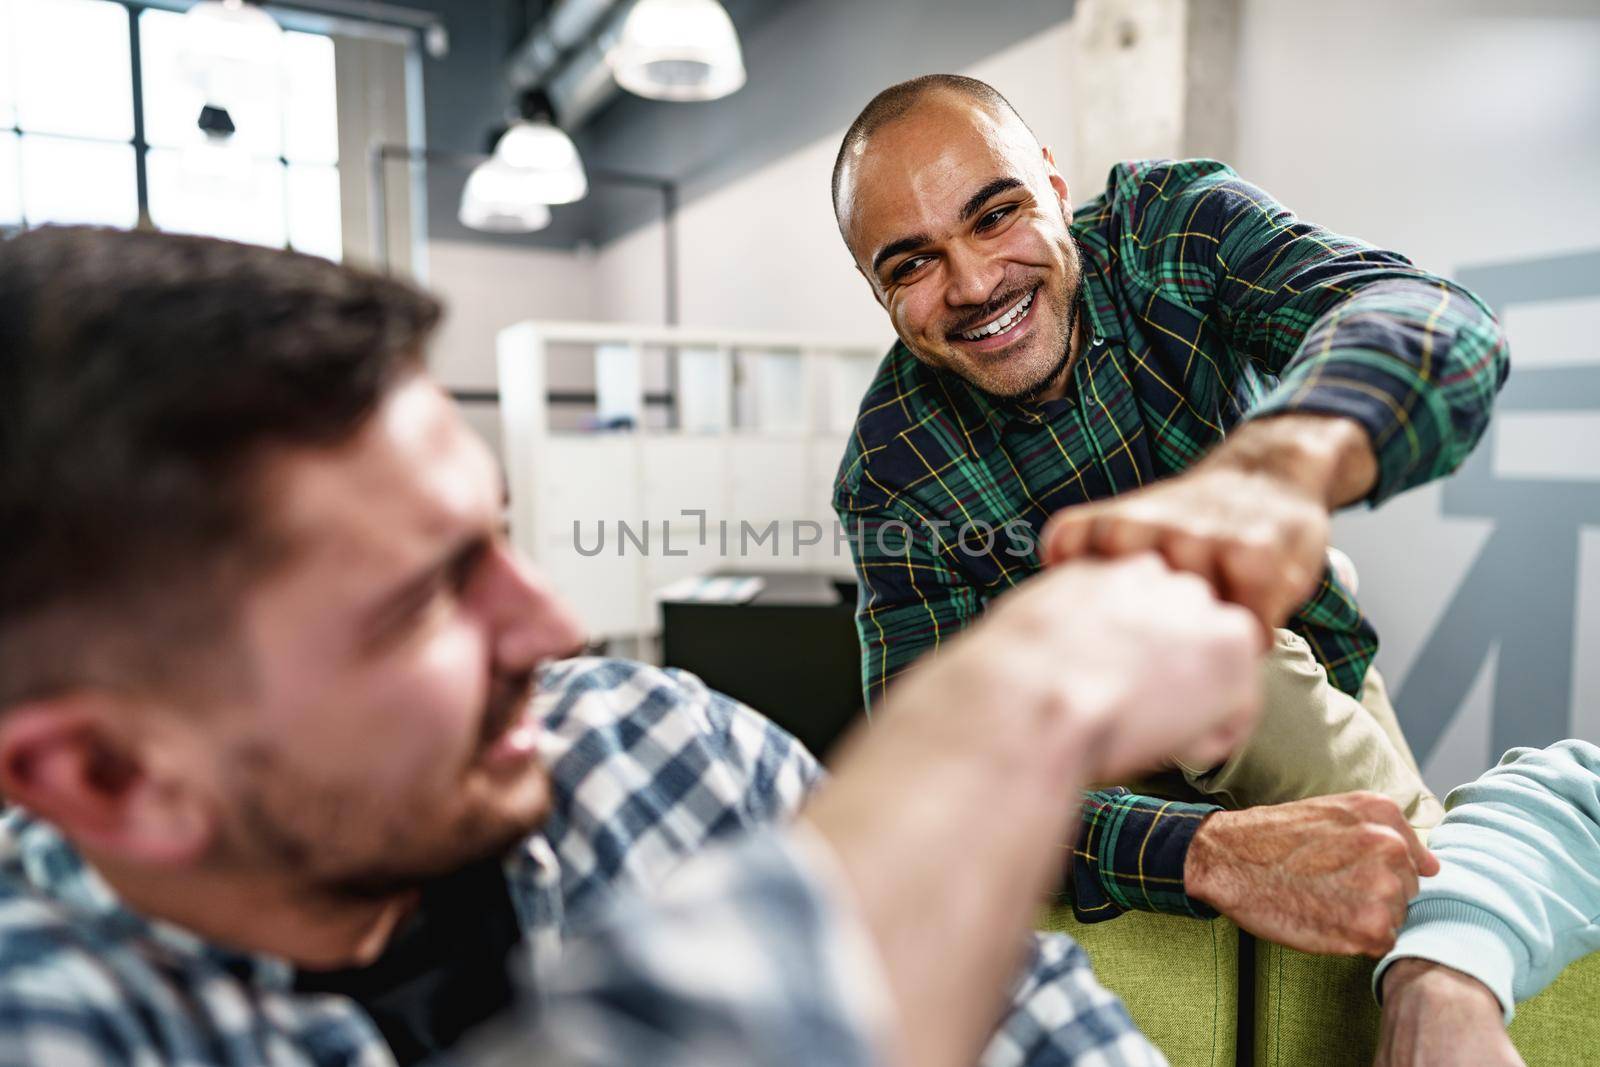 Two handsome men sitting together in the office and giving each other a fist bump, close up